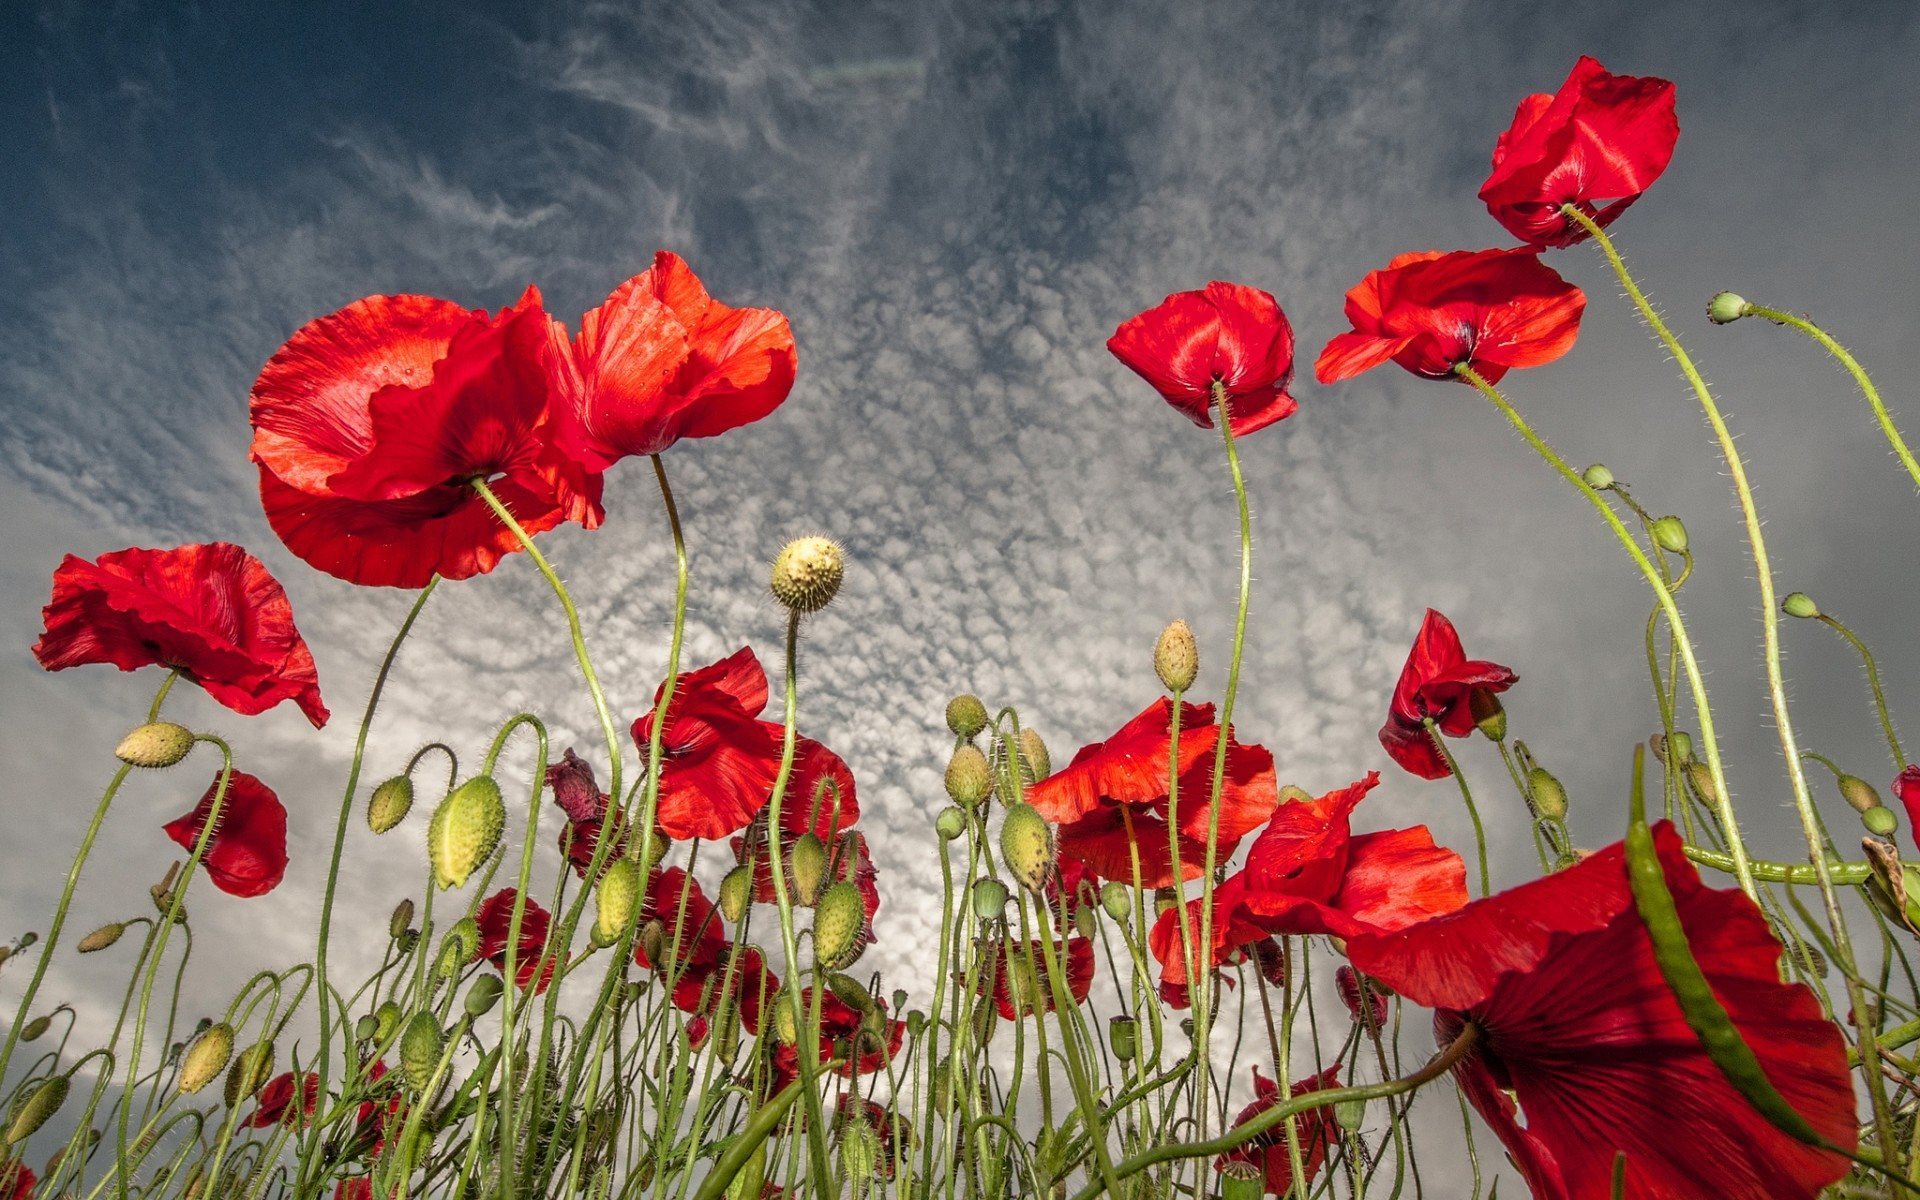  - red-poppies-wallpaper-high-definition-widescreen